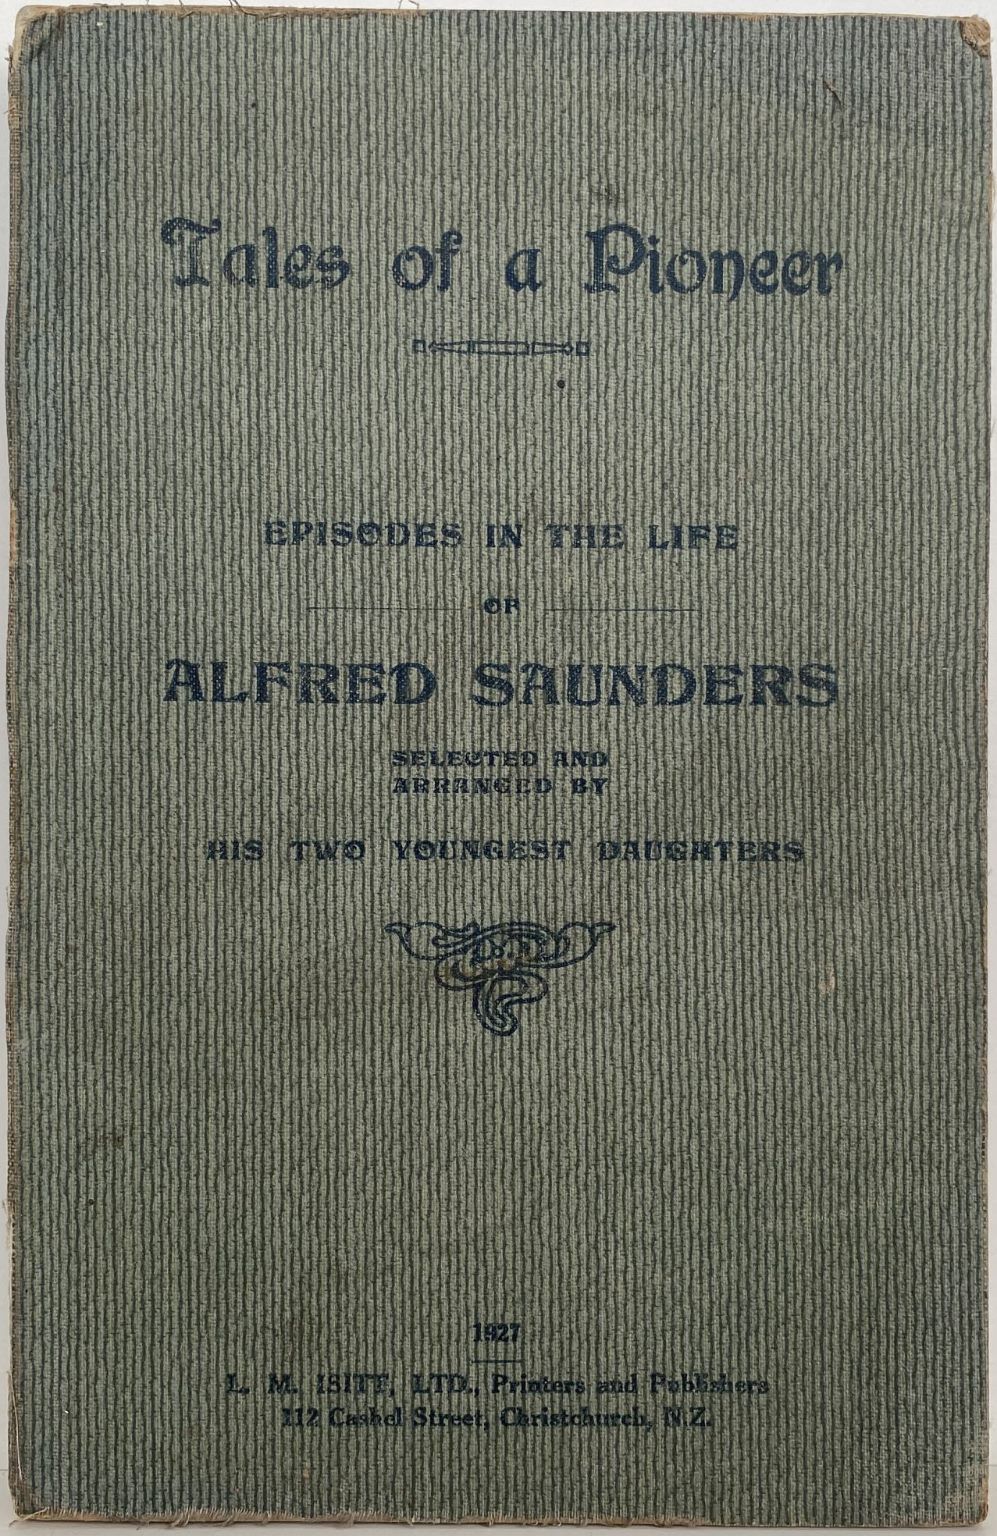 TALES OF A PIONEER: Episodes of the life of Alfred Saunders